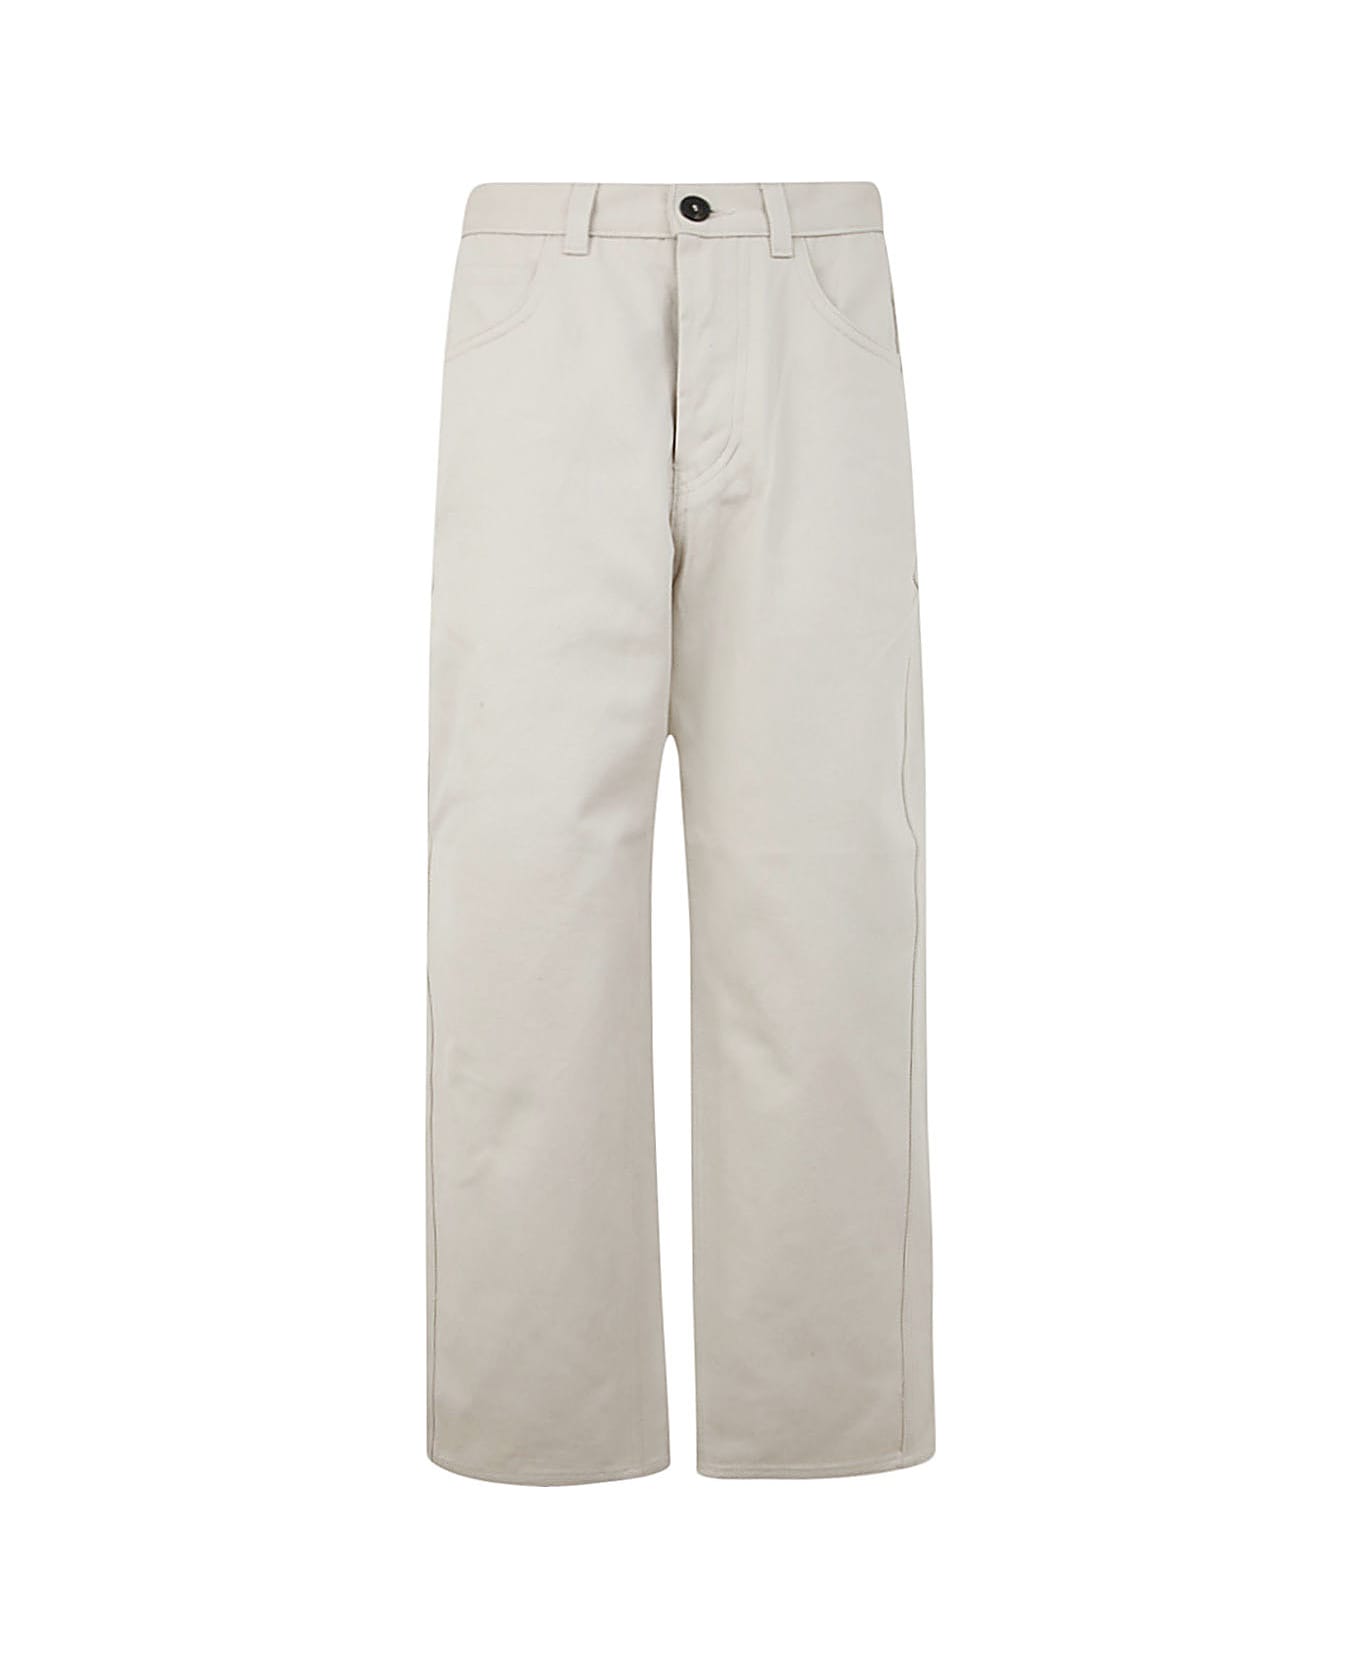 Sofie d'Hoore 5-pockets Jeans - Pearl